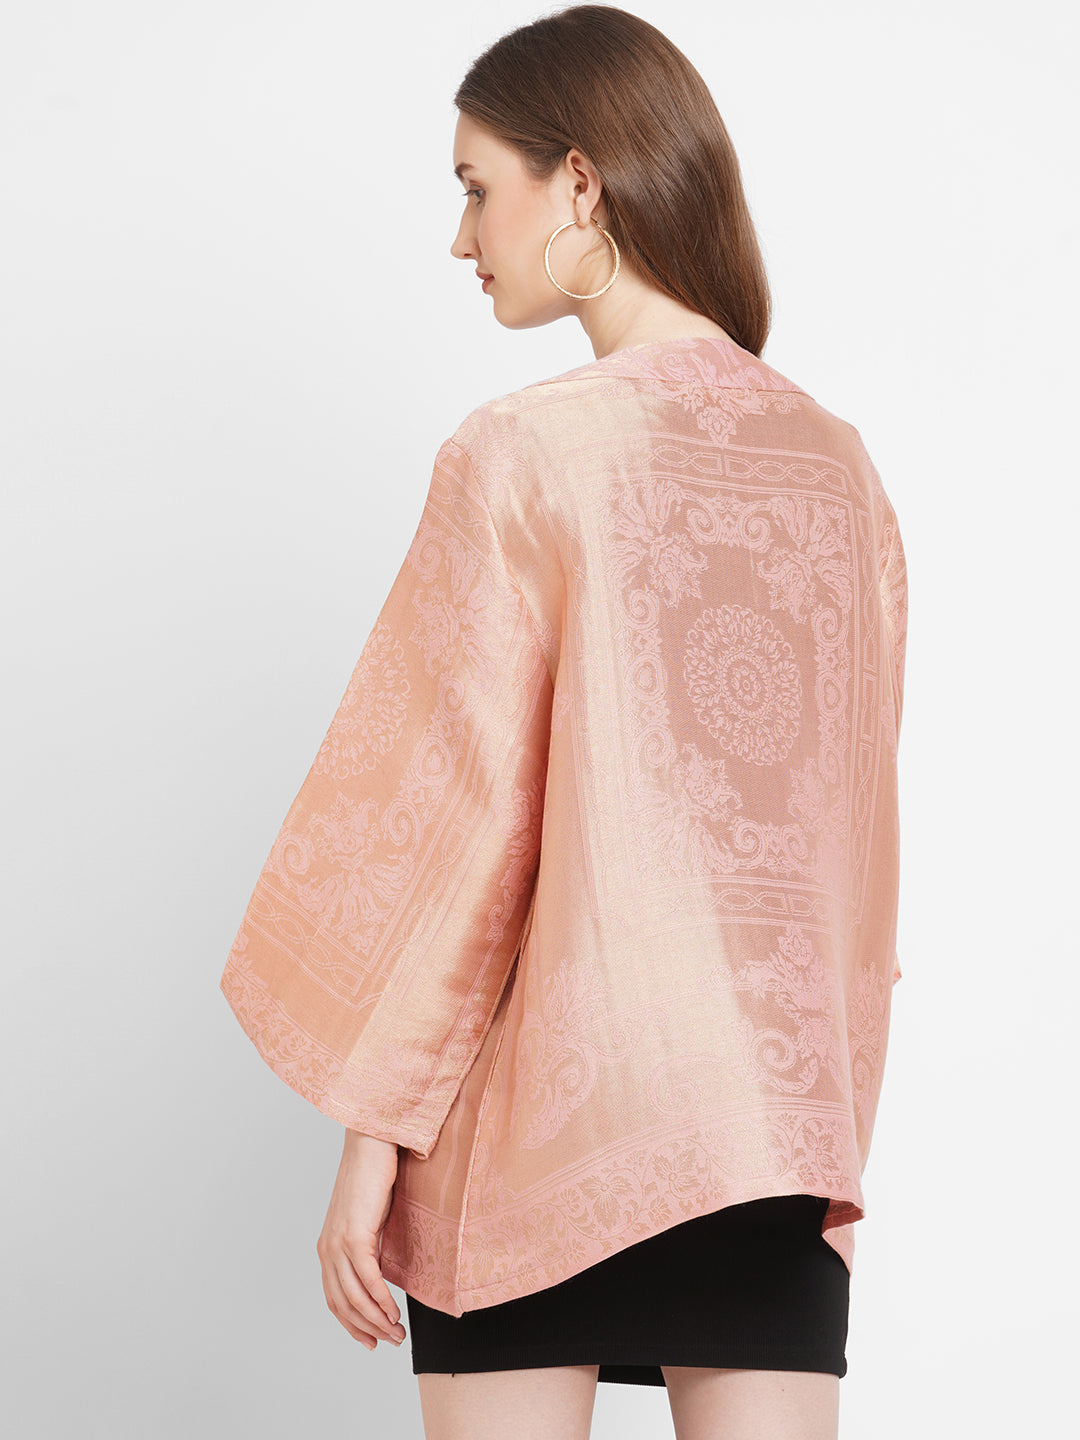 Brocade Baby Pink French Patterned Jacket